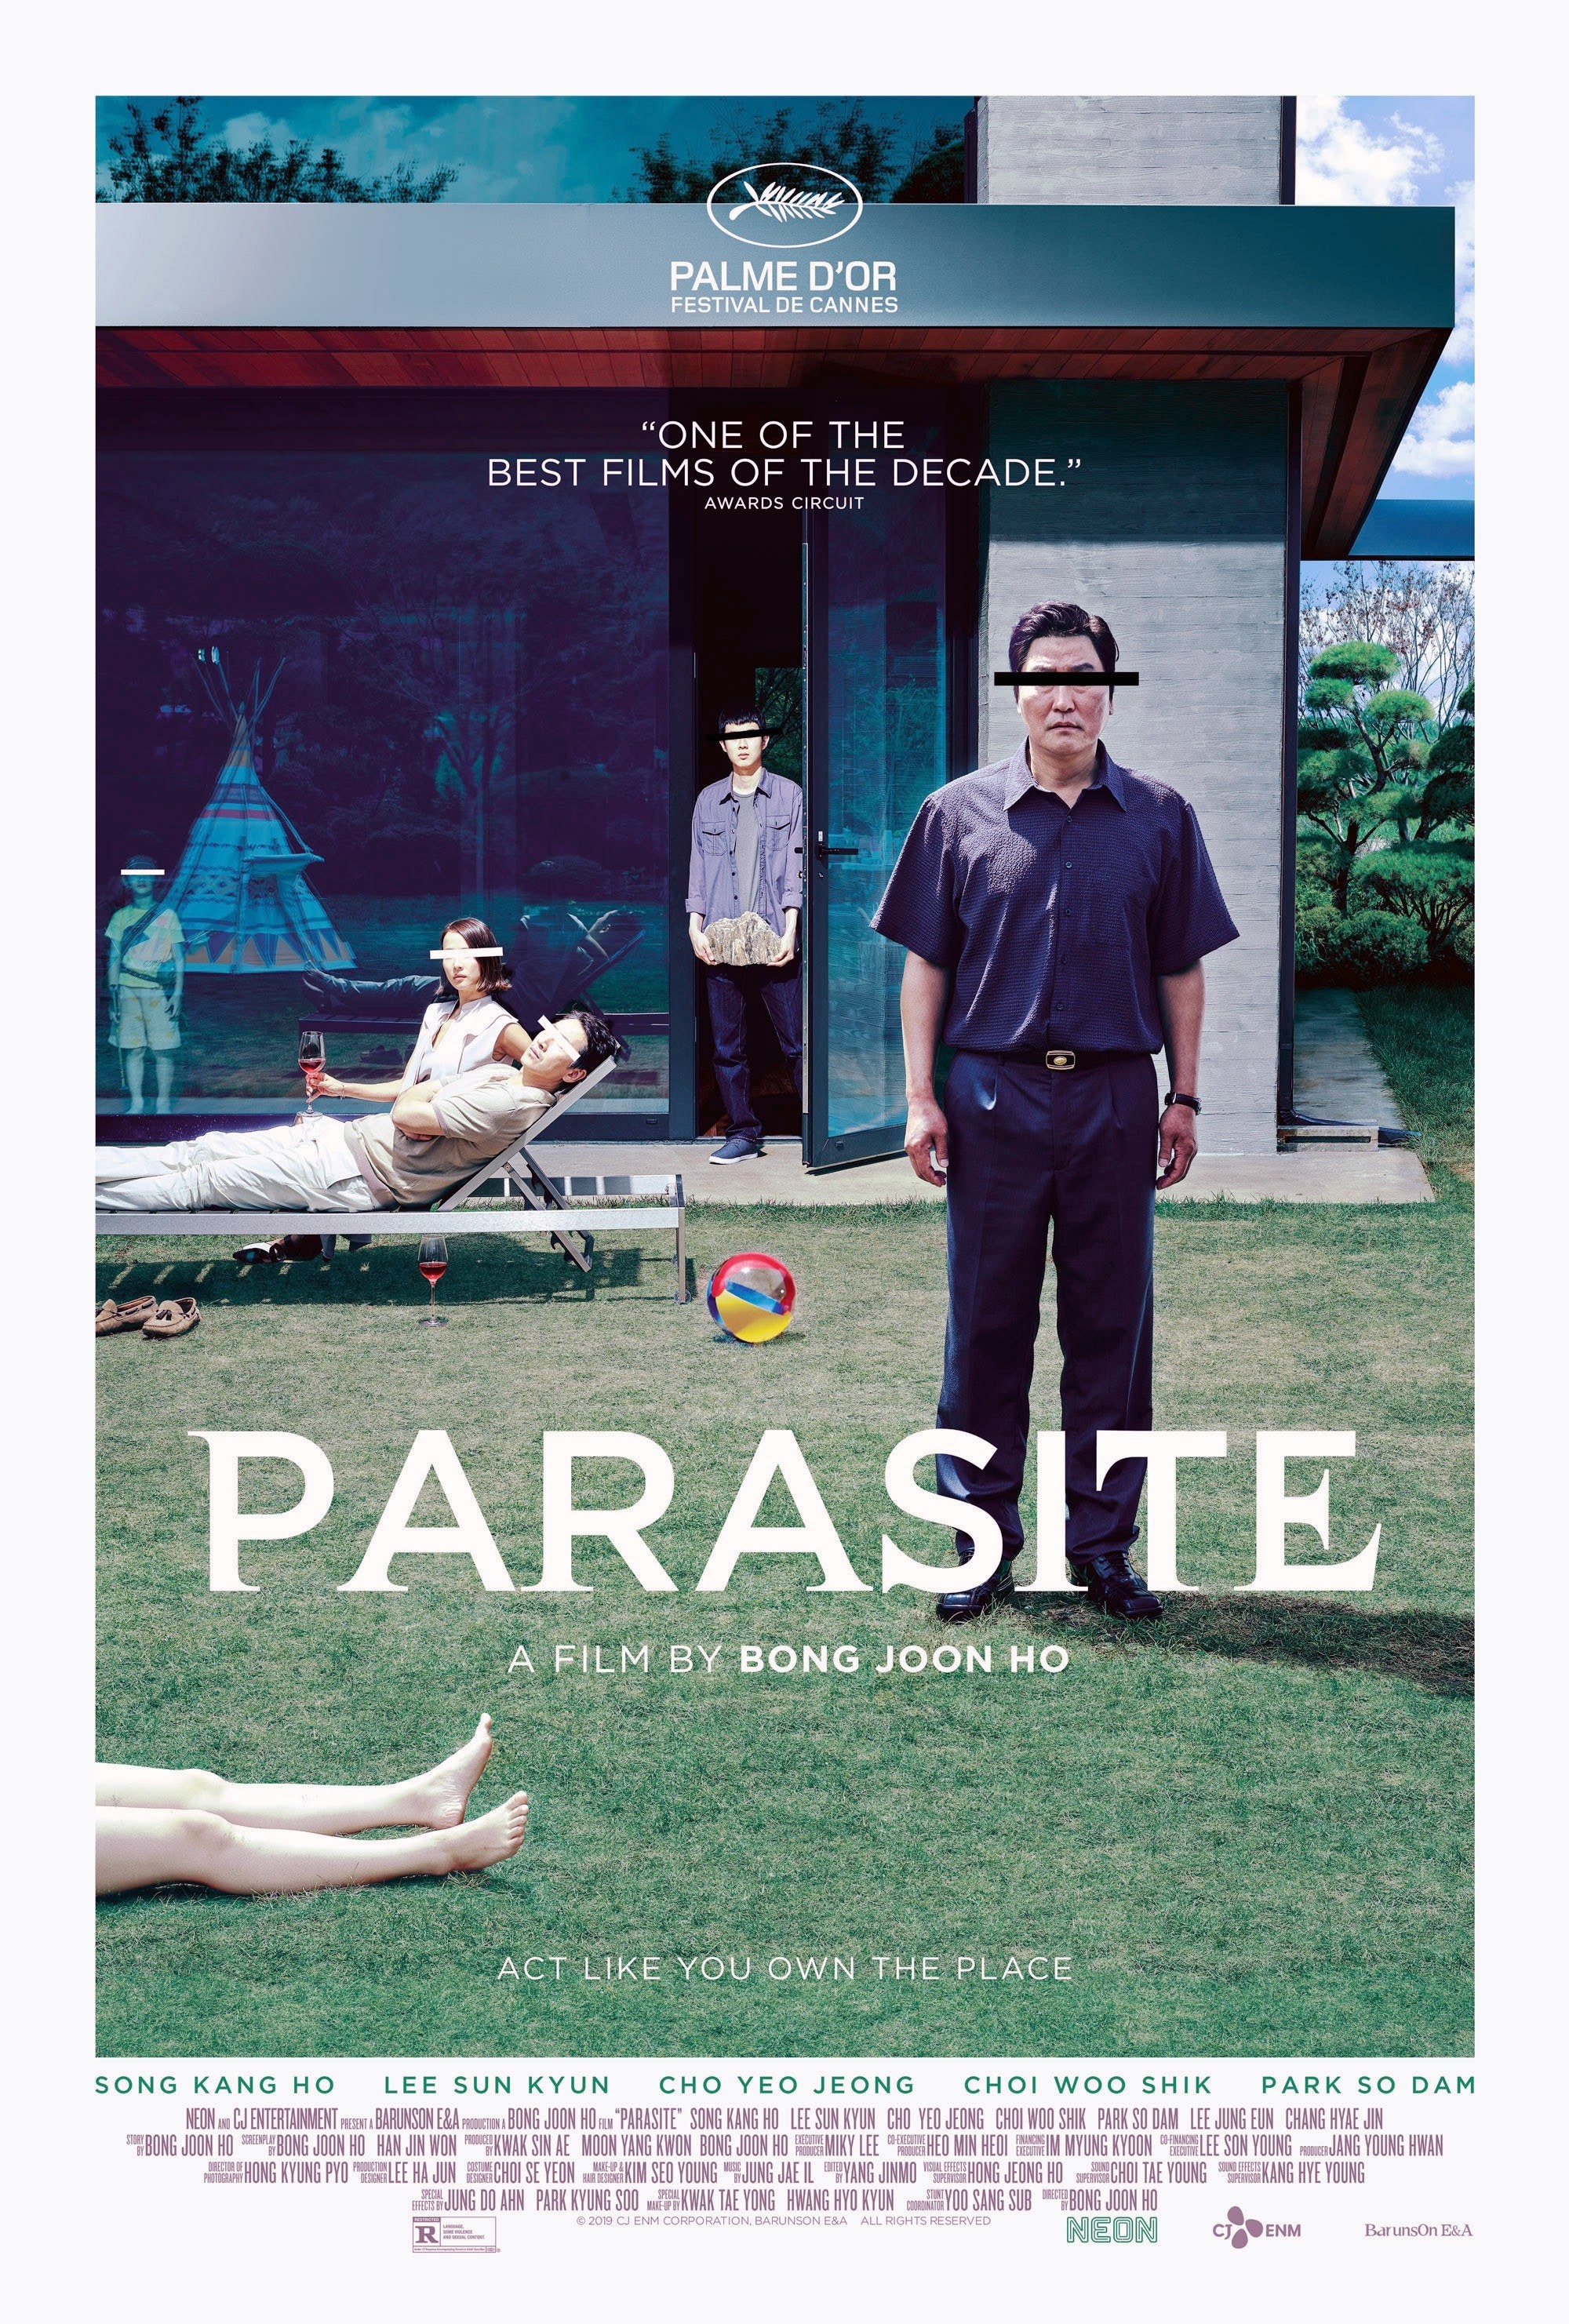 The poster for Parasite featuring several people standing and sitting in a luxurious backyard with bars placed over their eyes